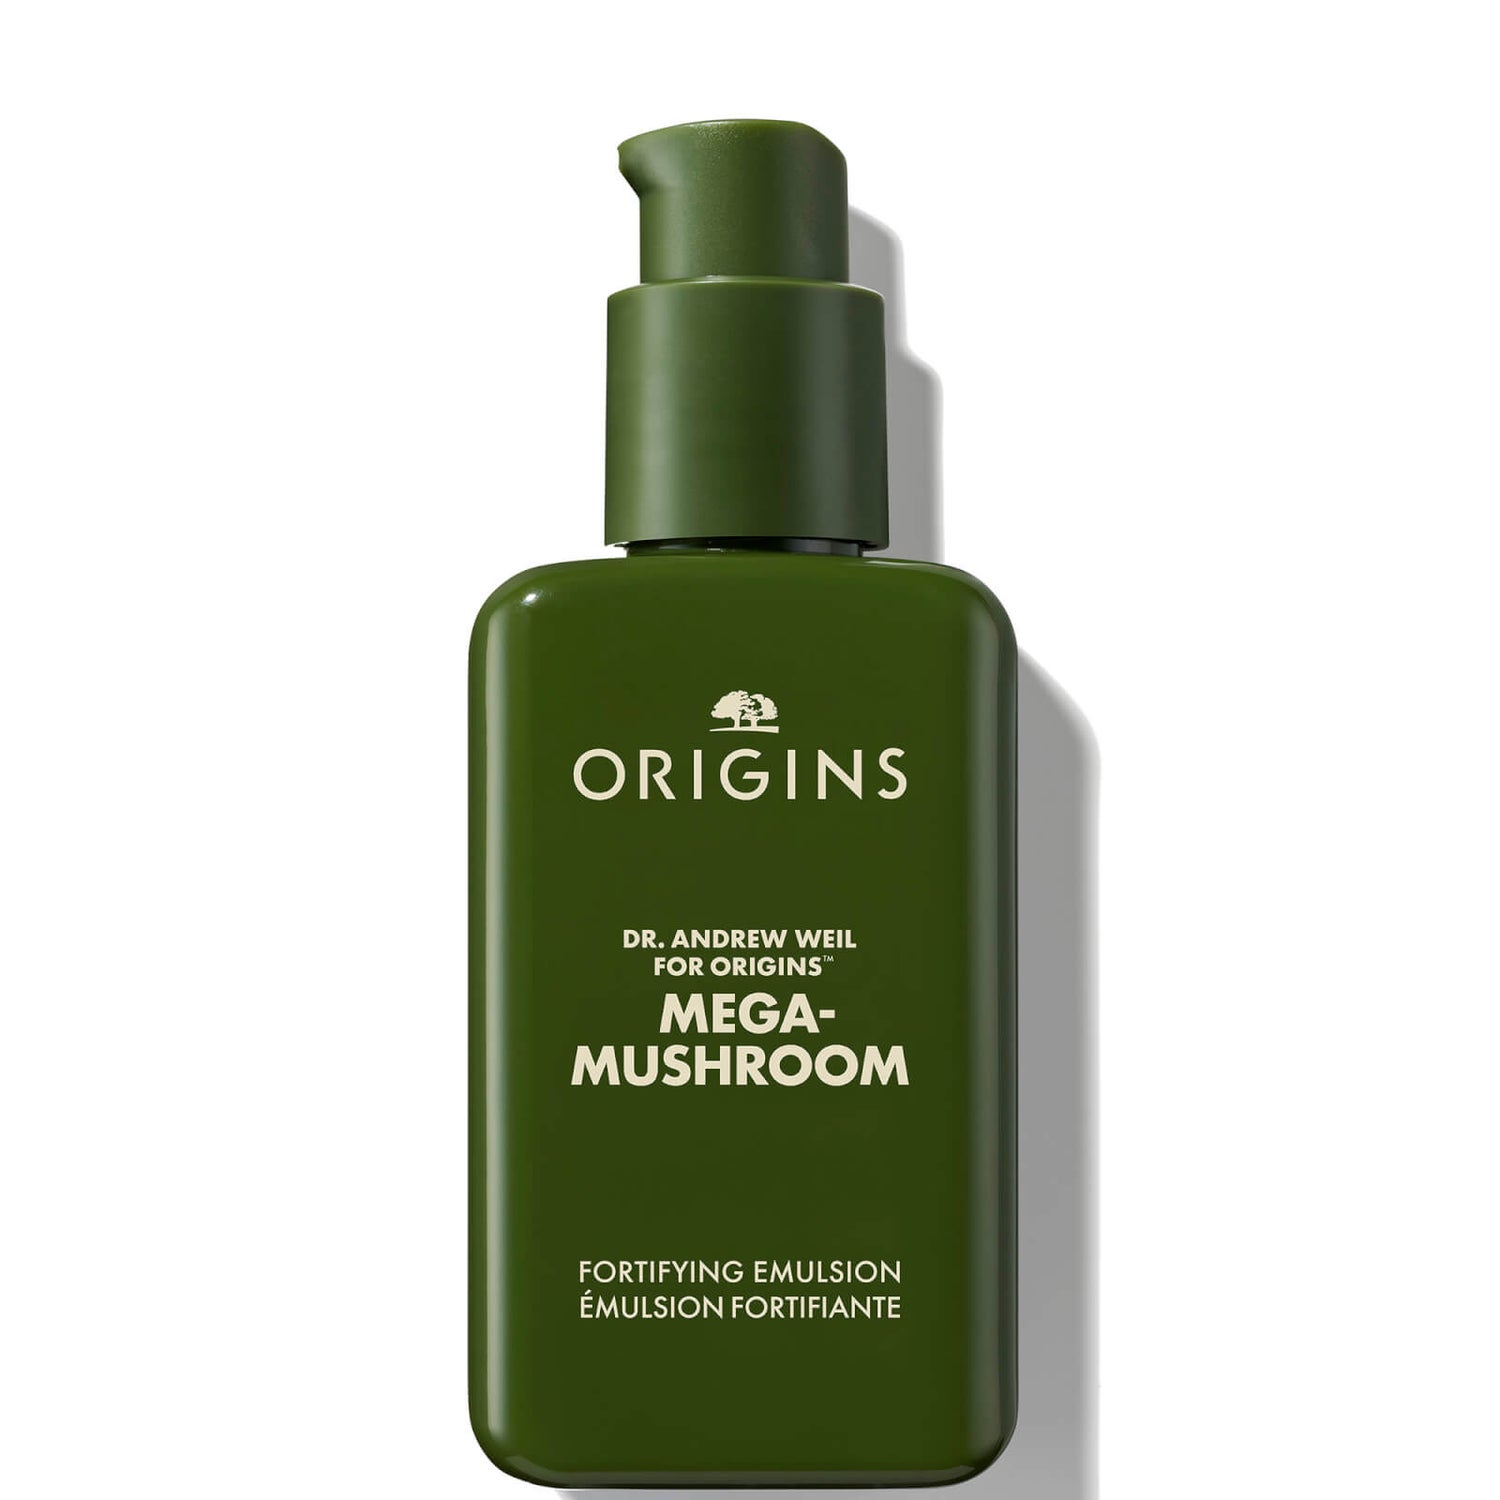 Dr. Weil for Origins Mega-Mushroom Relief and Resilience Fortifying Emulsion 100ml